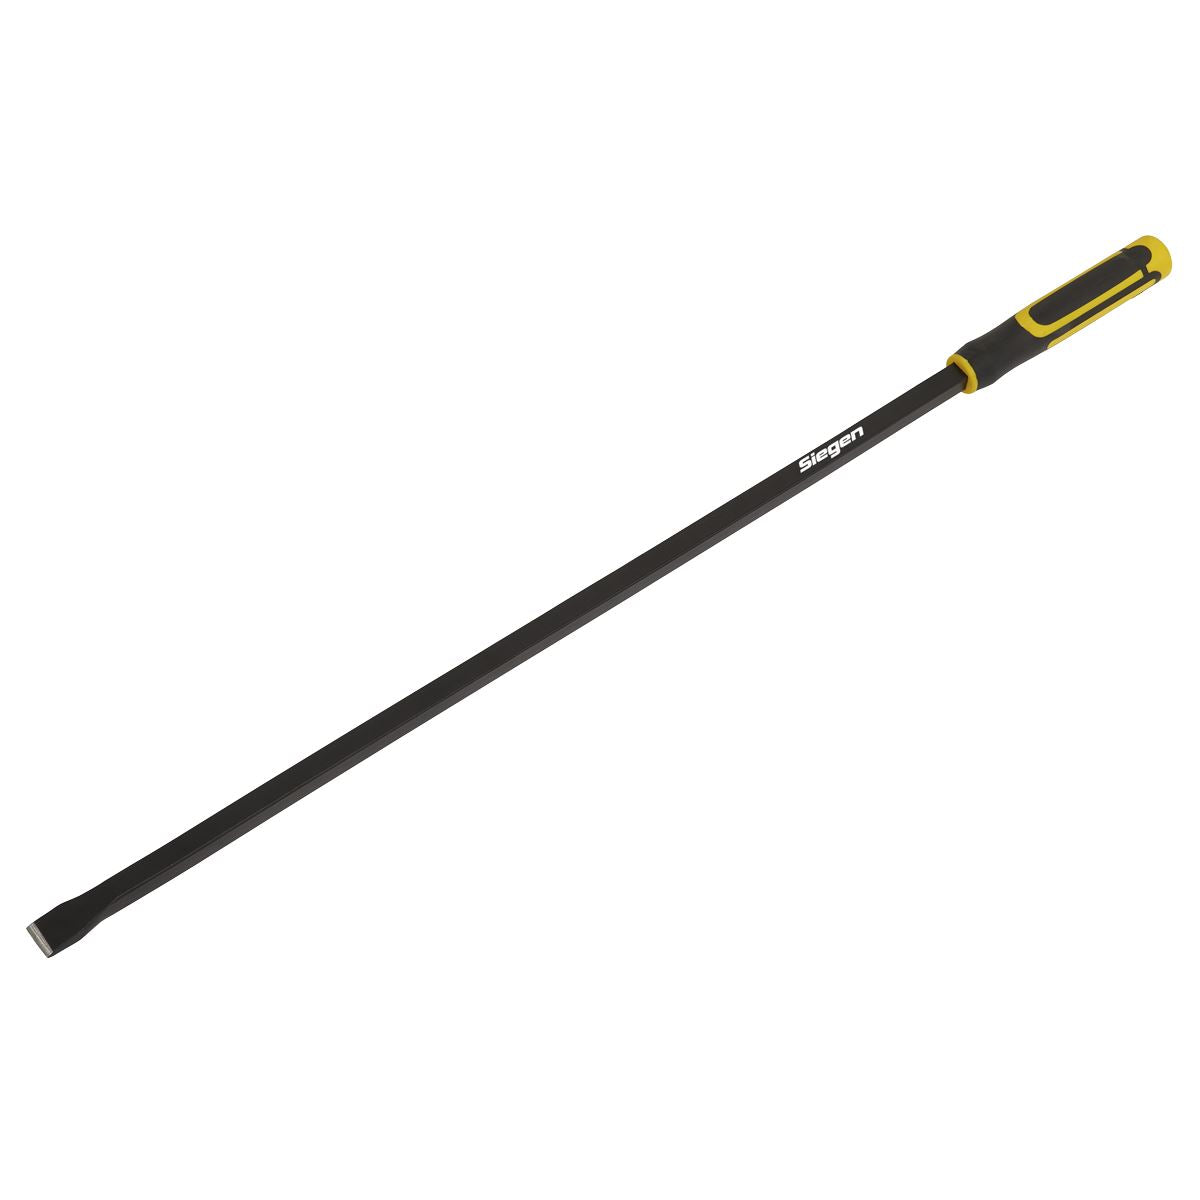 Siegen by Sealey Pry Bar 900mm Straight Heavy-Duty with Hammer Cap